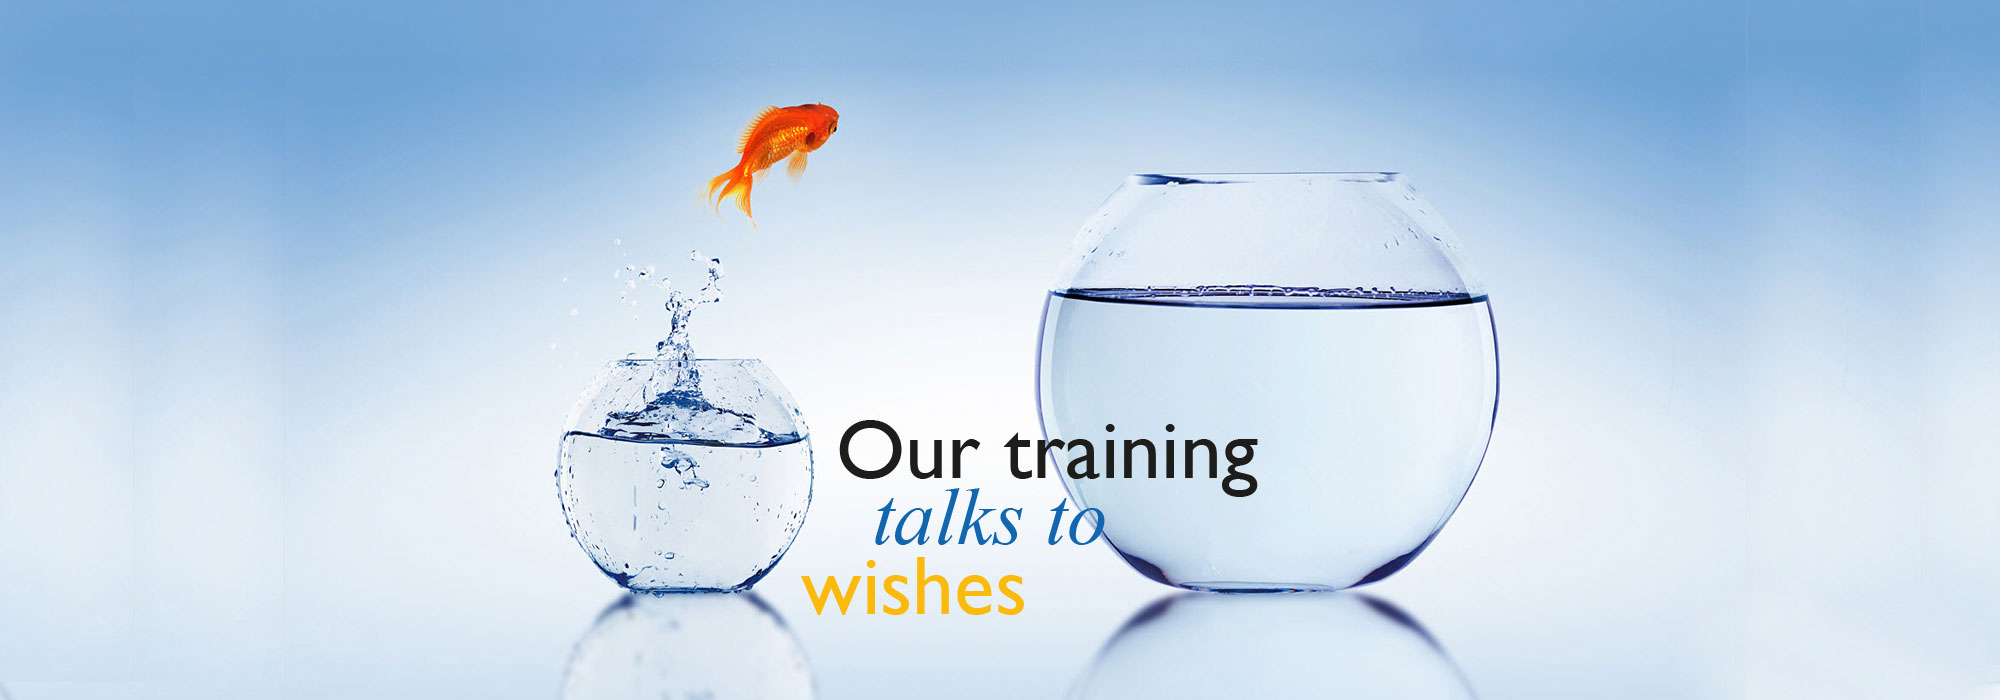 our training talk to wishes